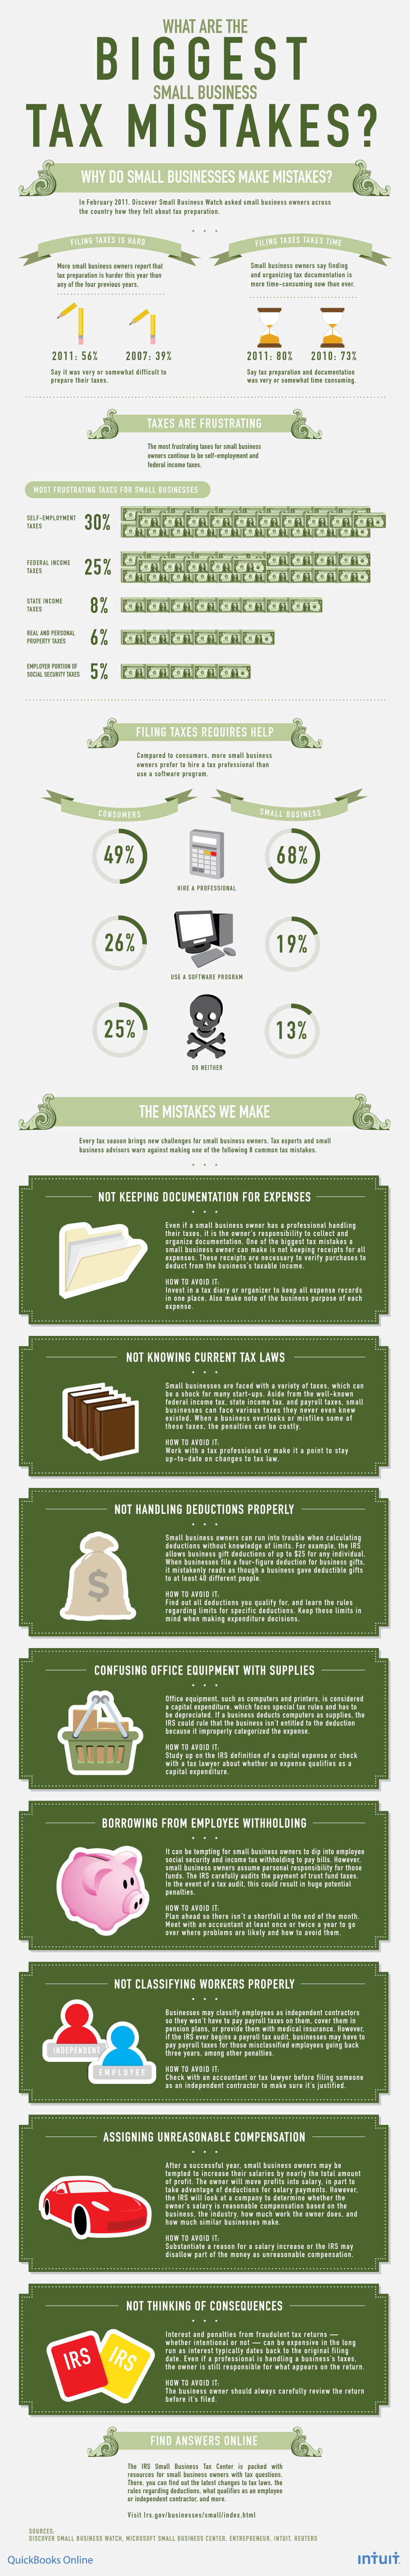 Infographic Biggest Tax Mistakes